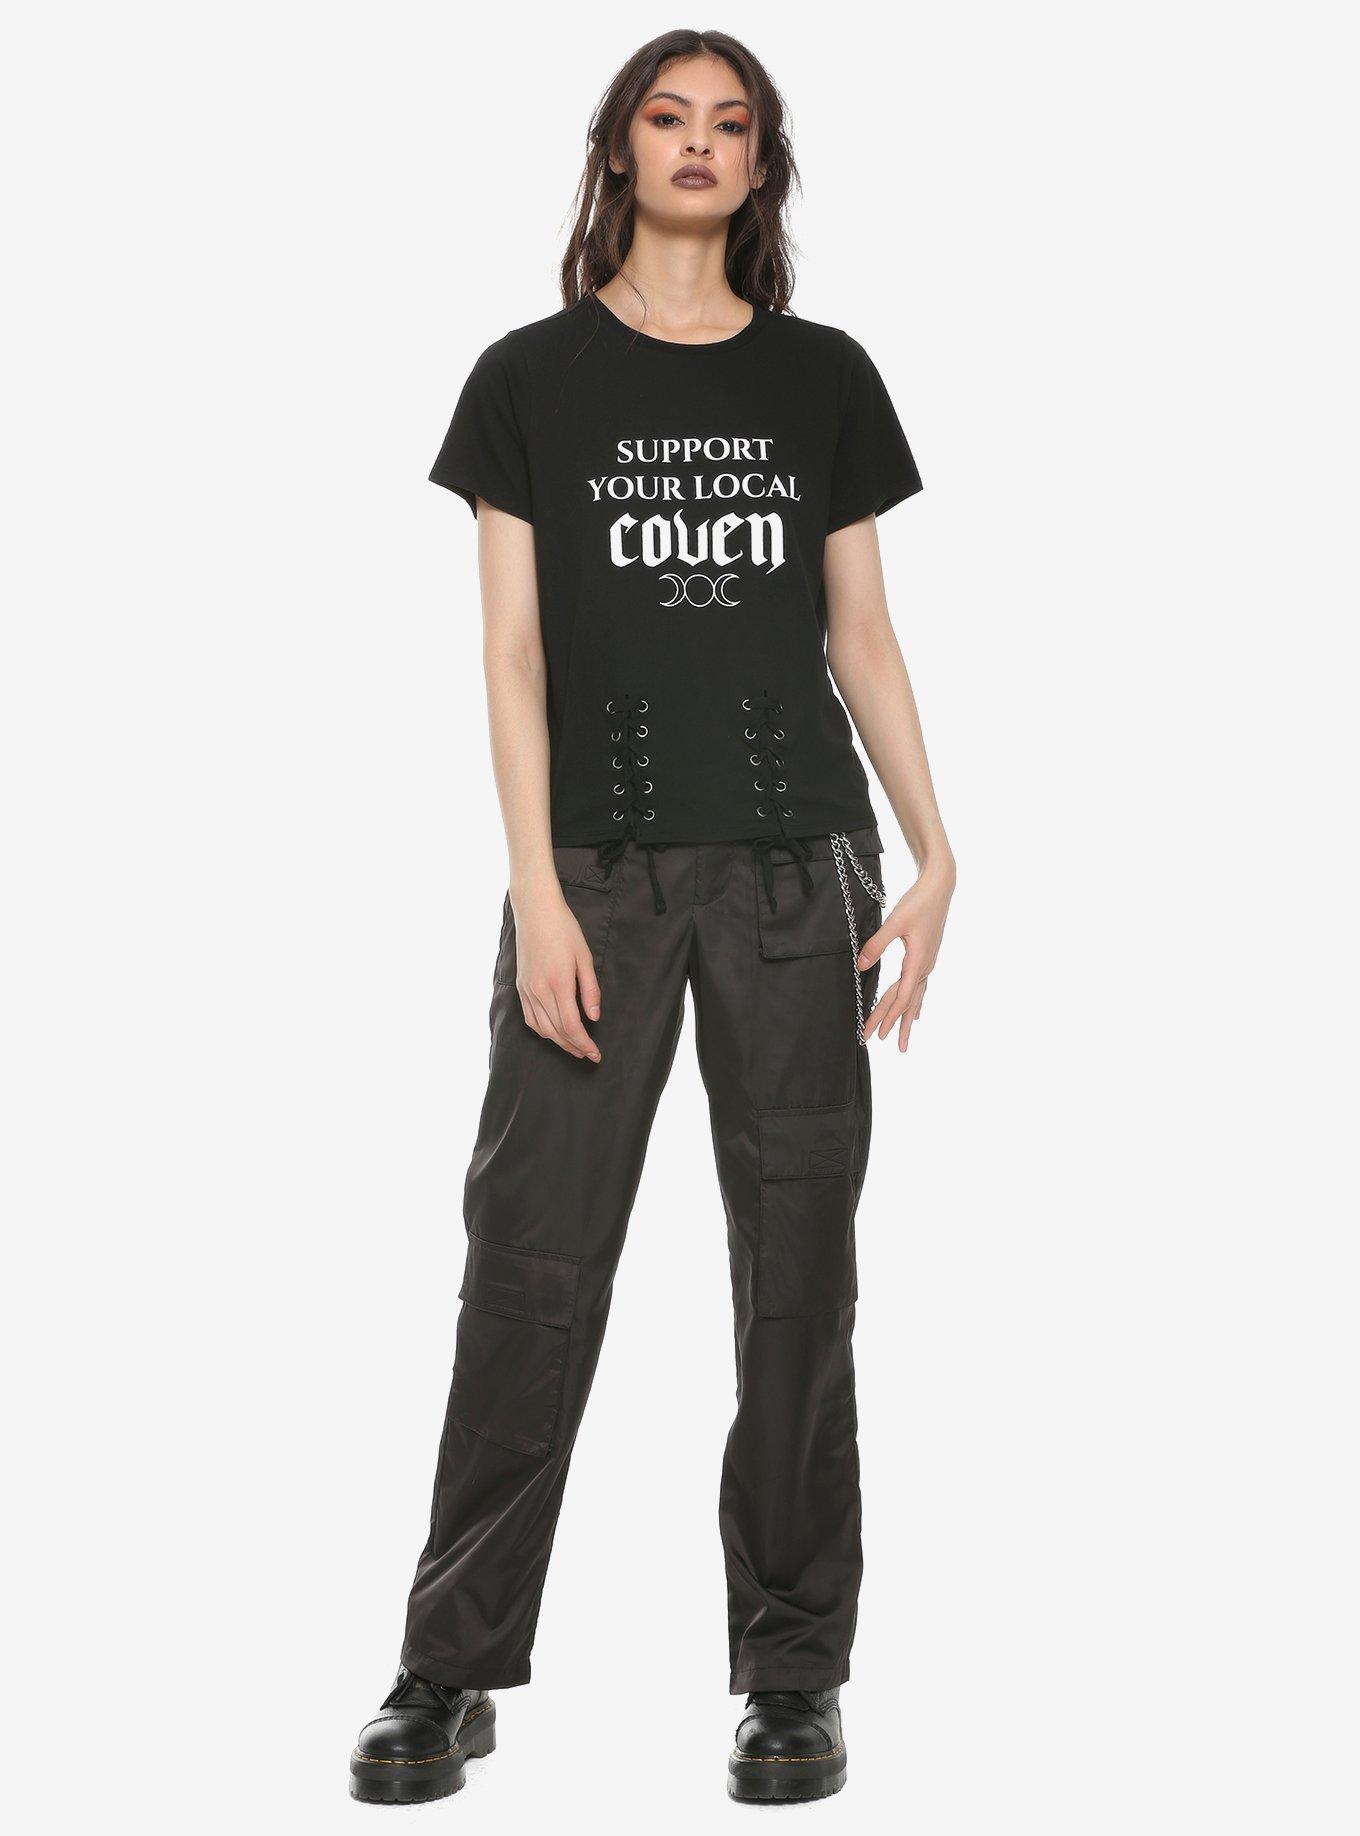 Support Your Local Coven Lace-Up Girls Top, BLACK, alternate